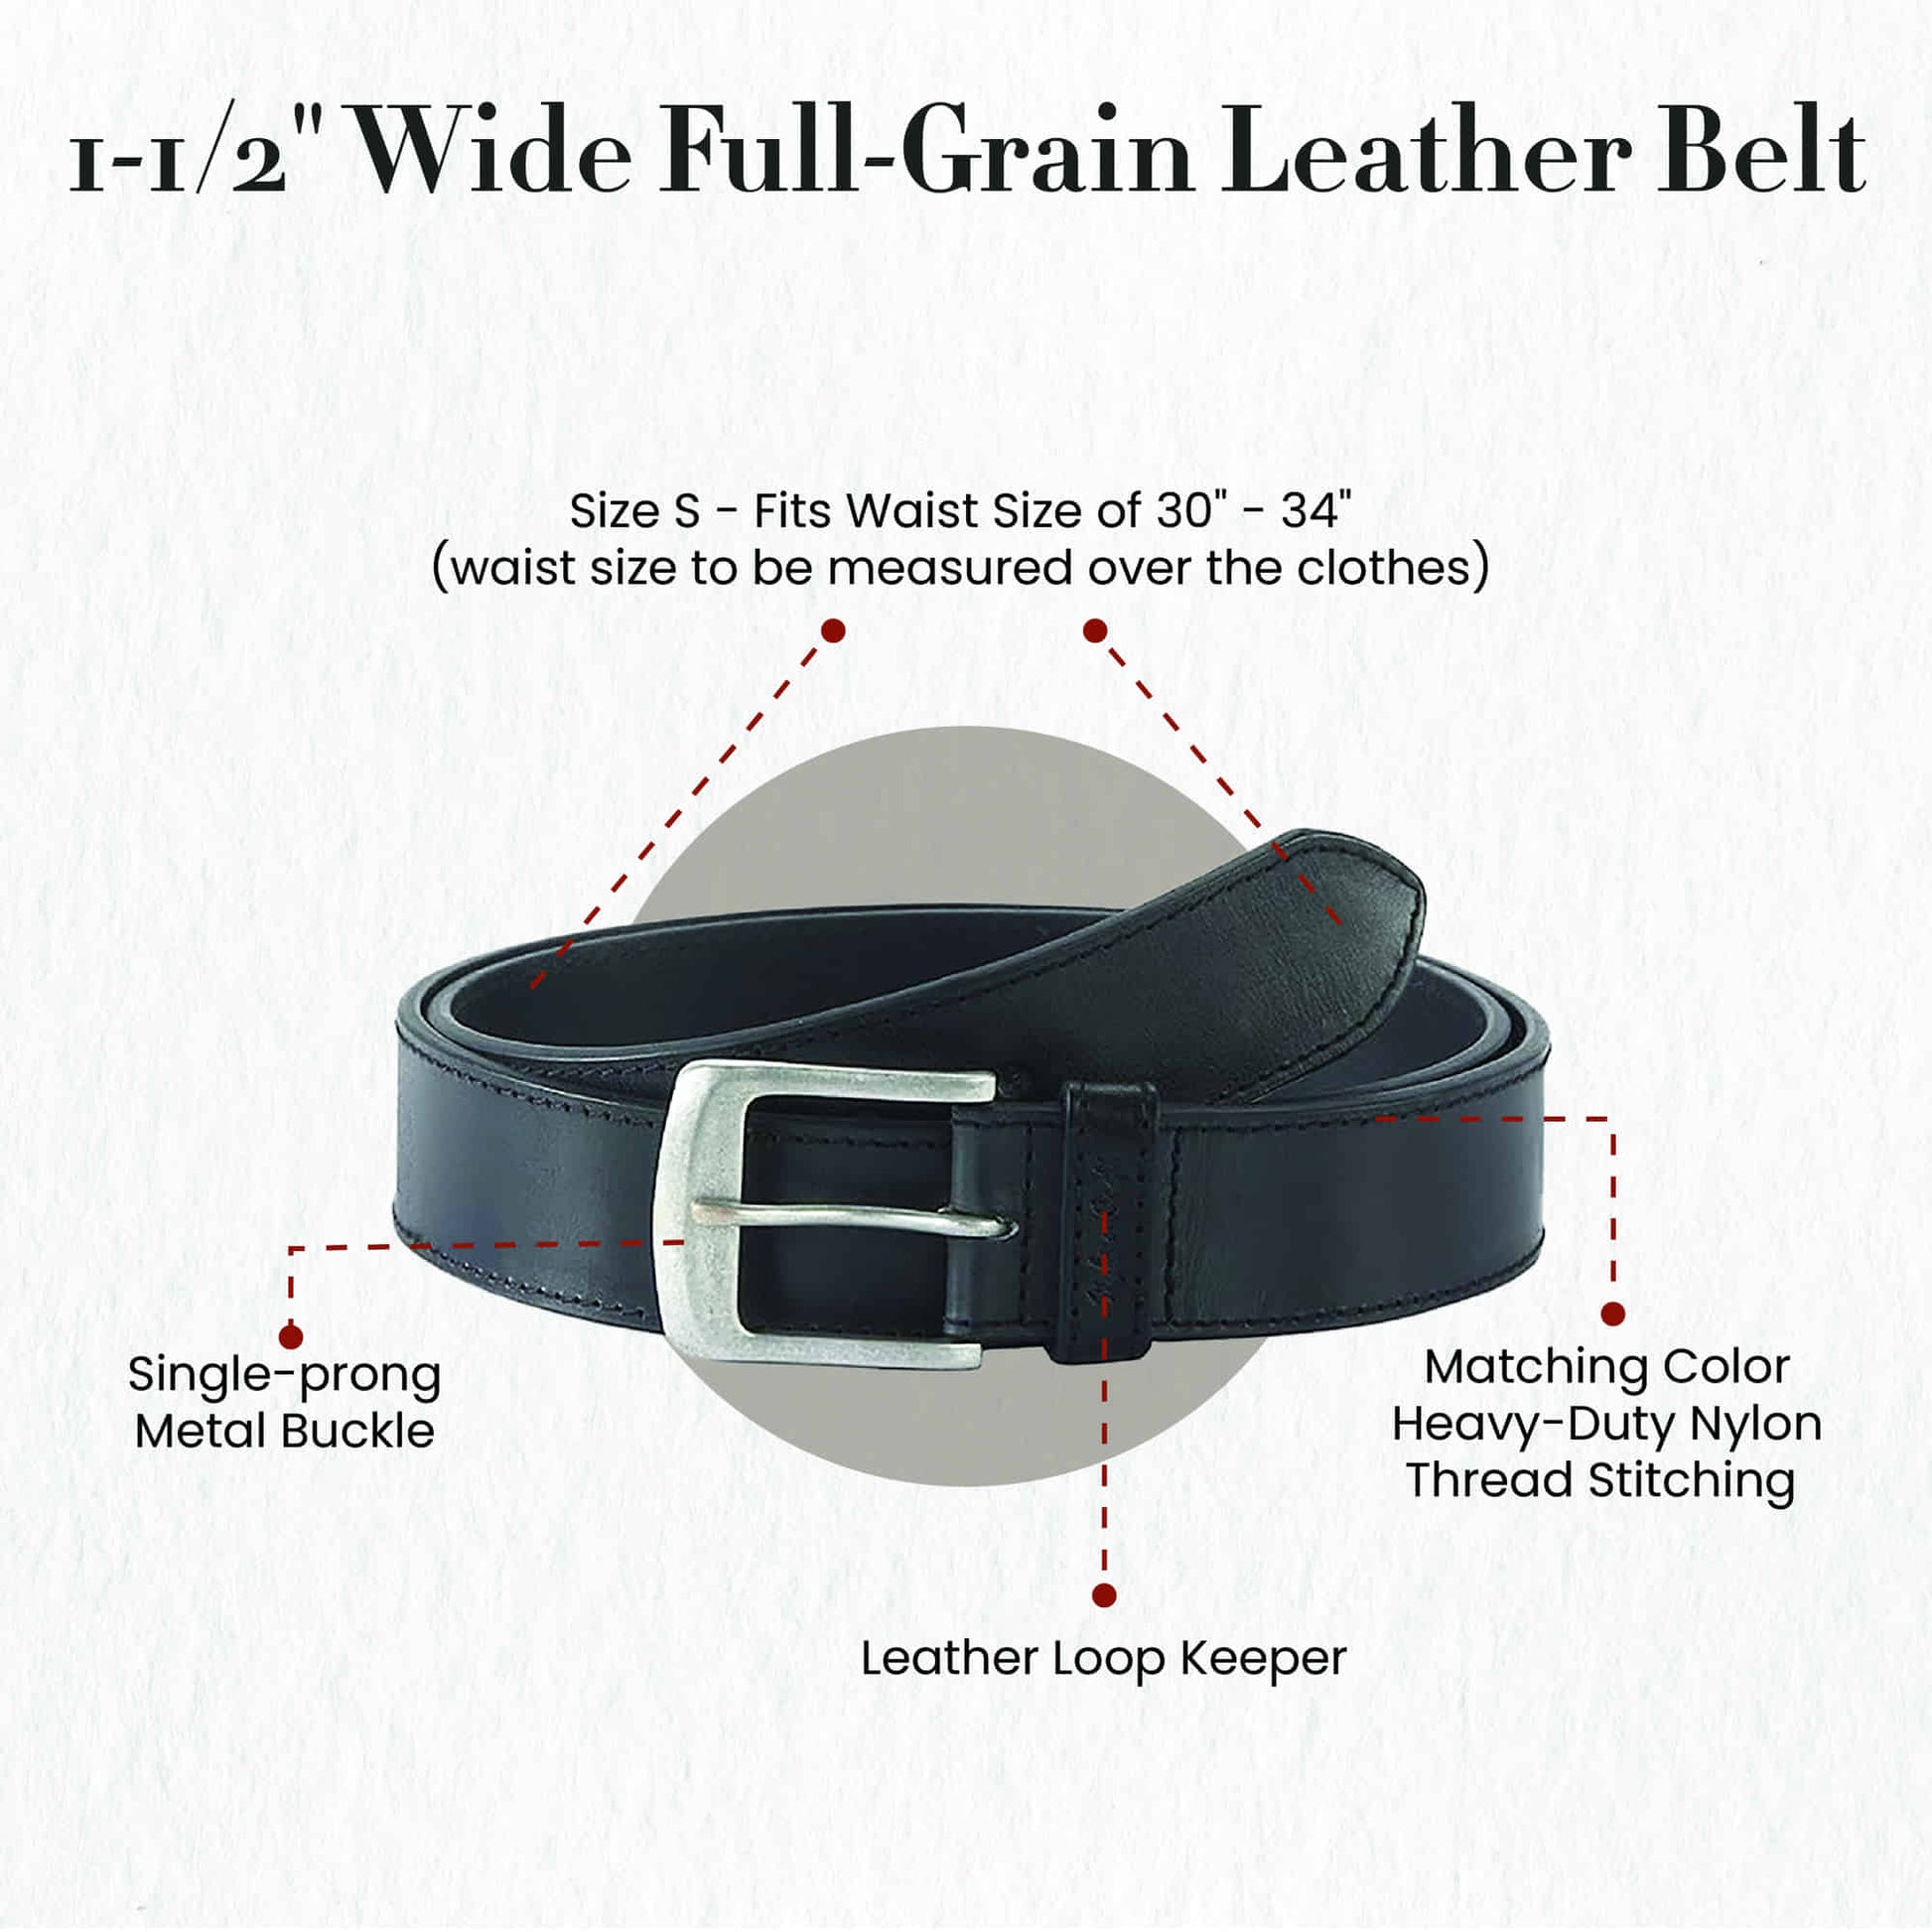 392701-S - one and a half inch wide small size leather belt in black color full grain leather - front view showing the details